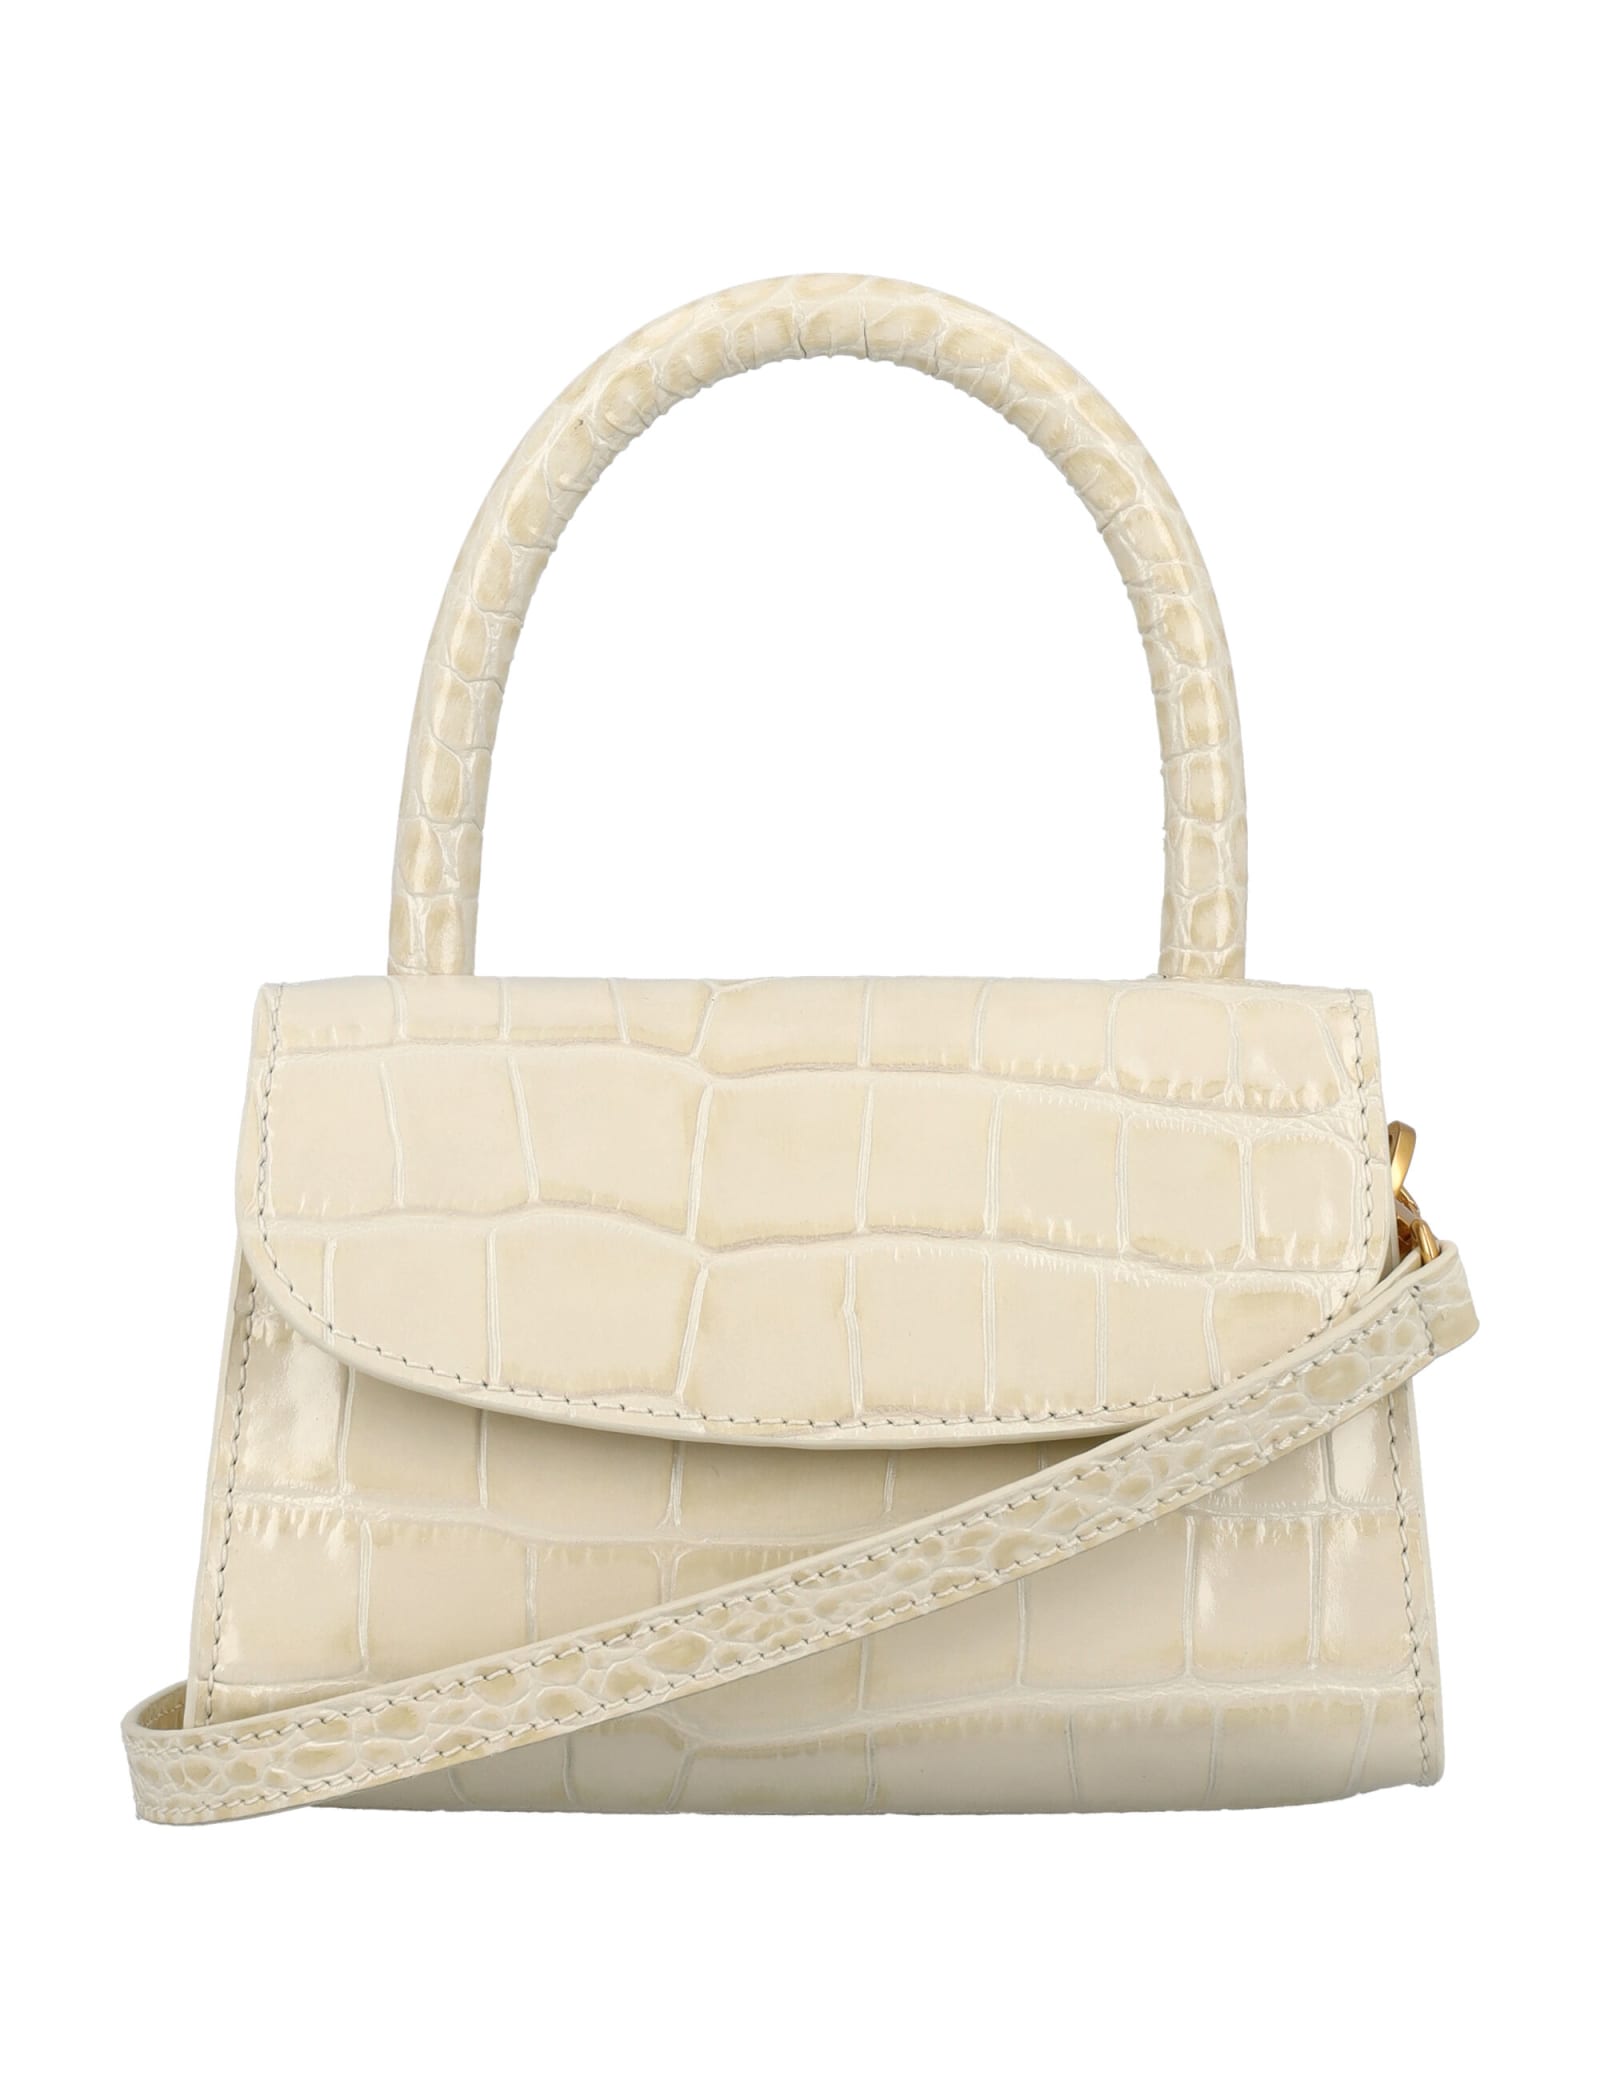 BY FAR Mini Croco Embossed Leather Bag